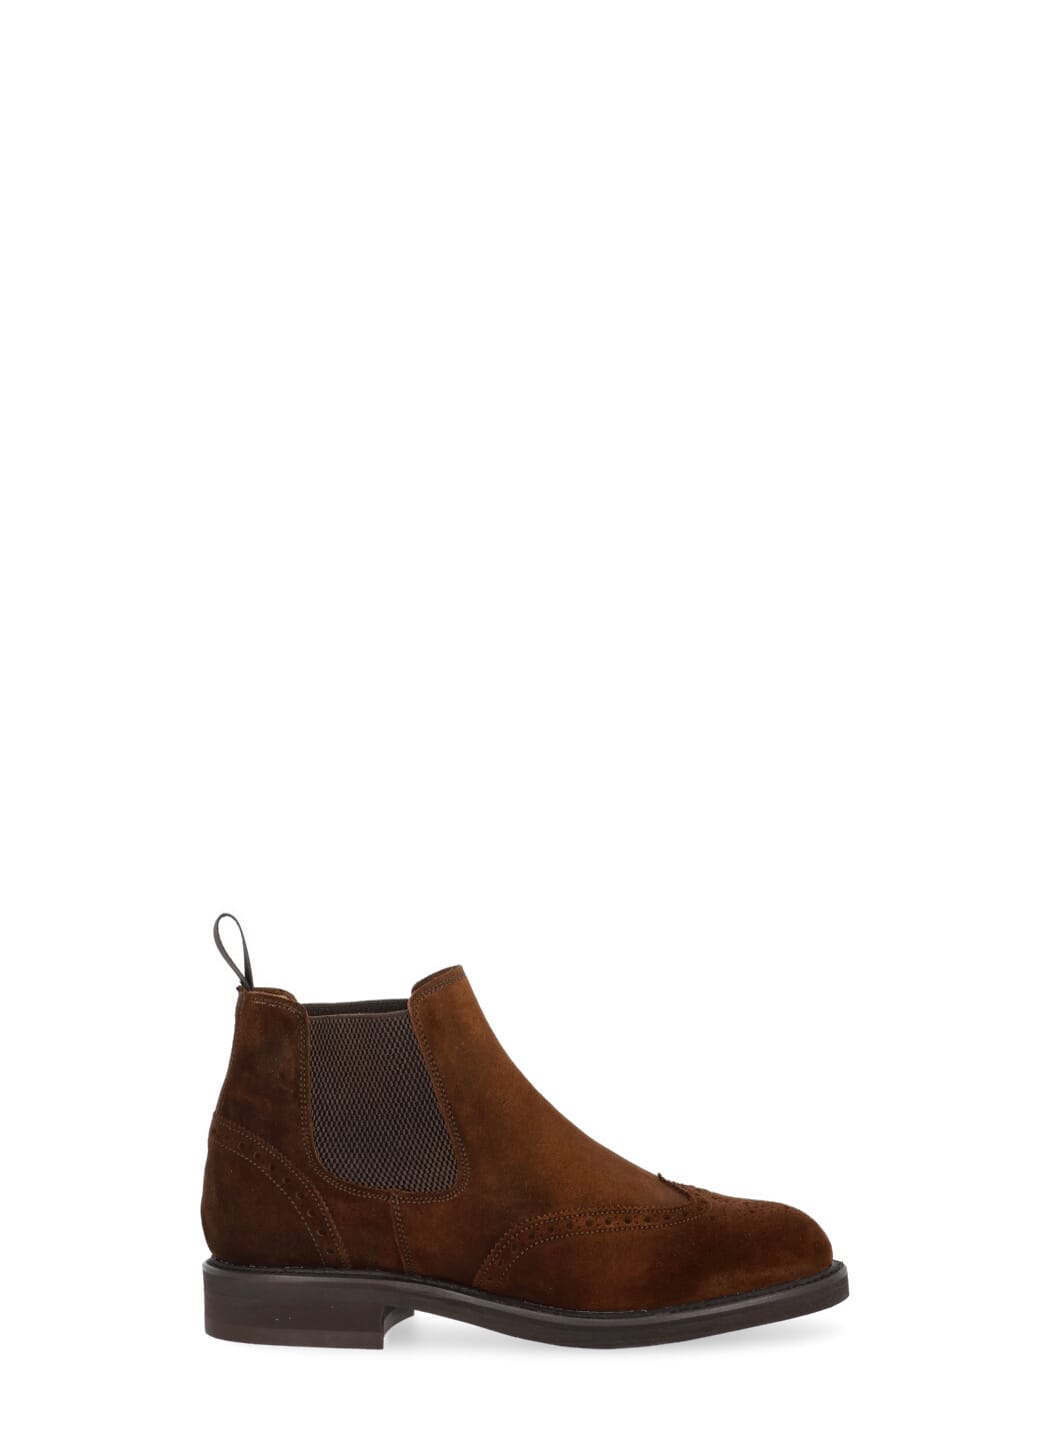 Berwick 1707 Suede Leather Chelsea Boots